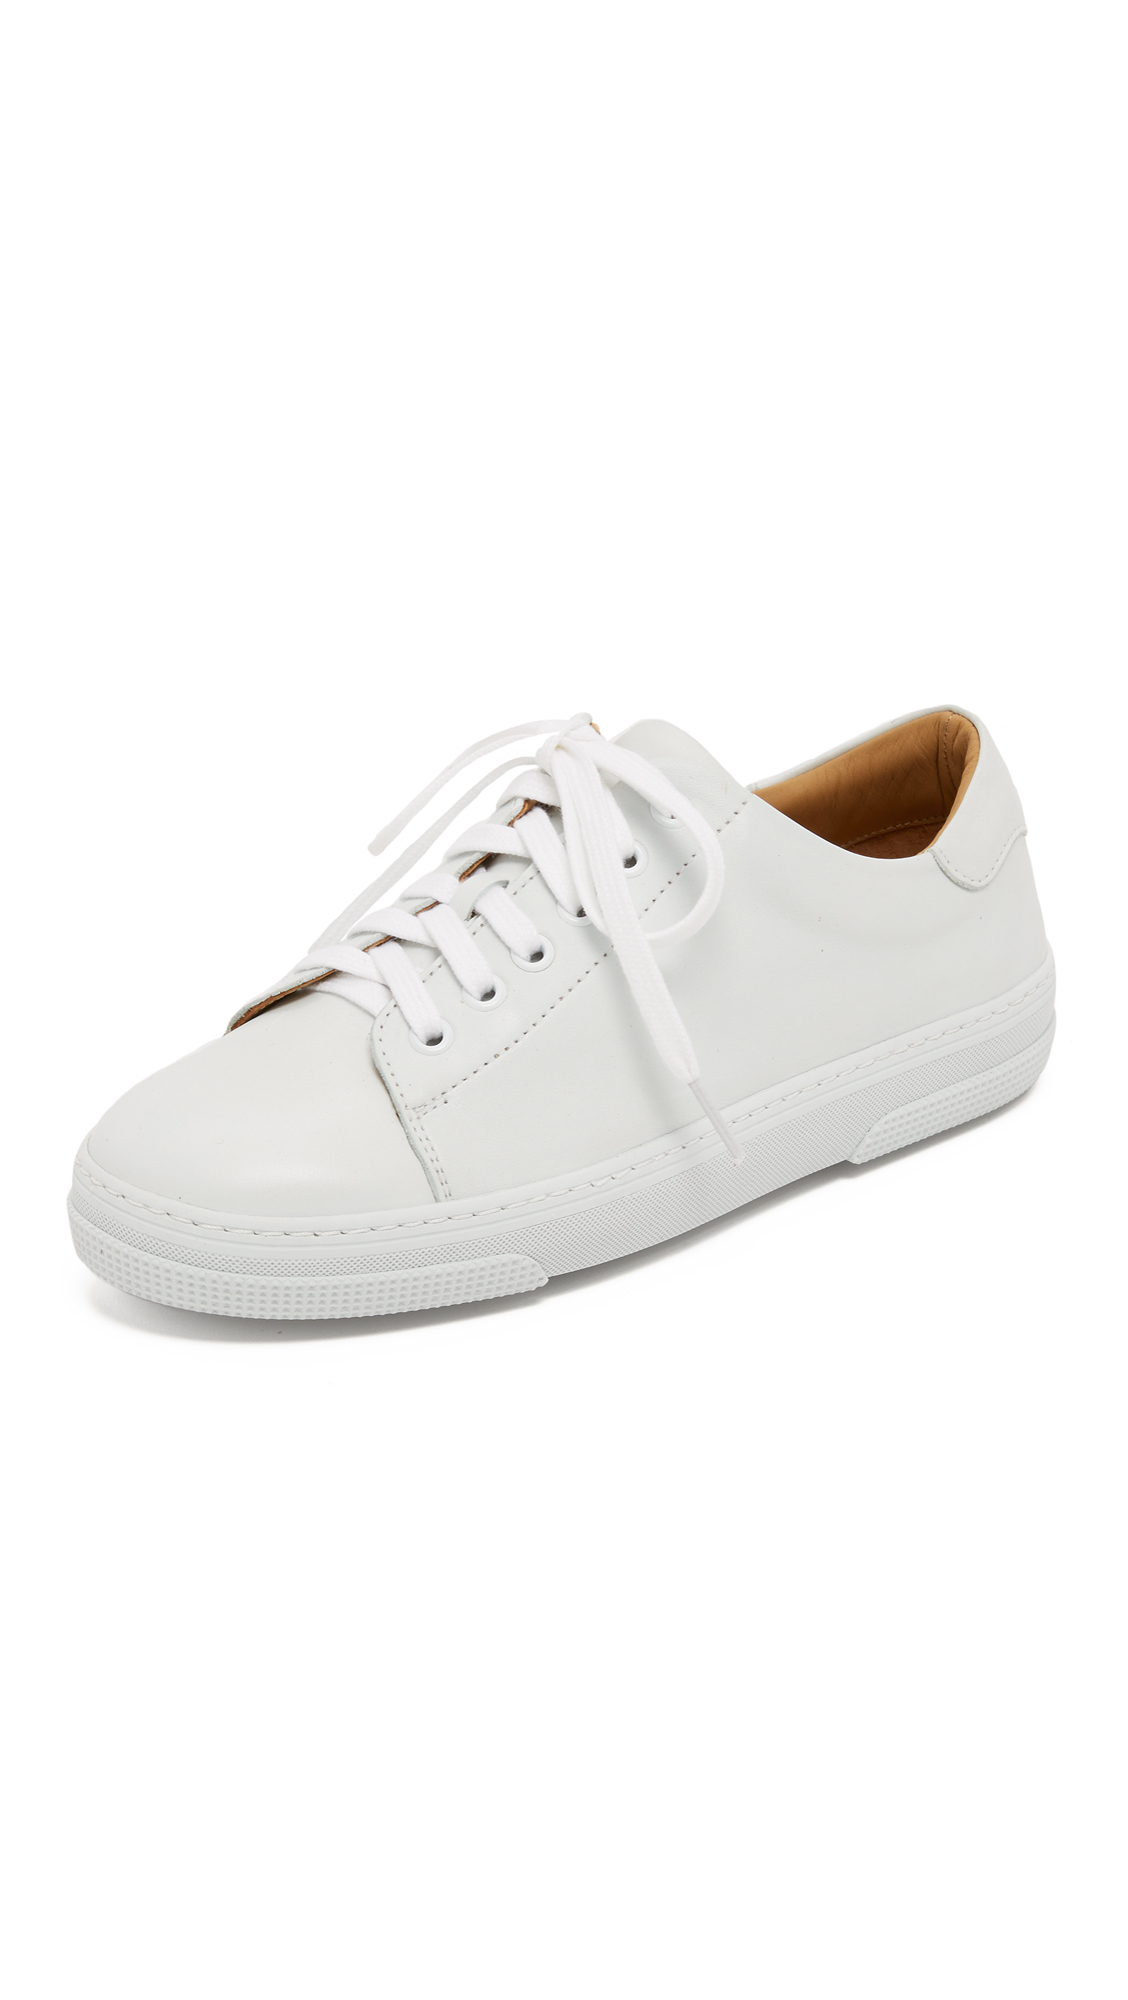 A.P.C. Steffi Sneakers in White | Lyst